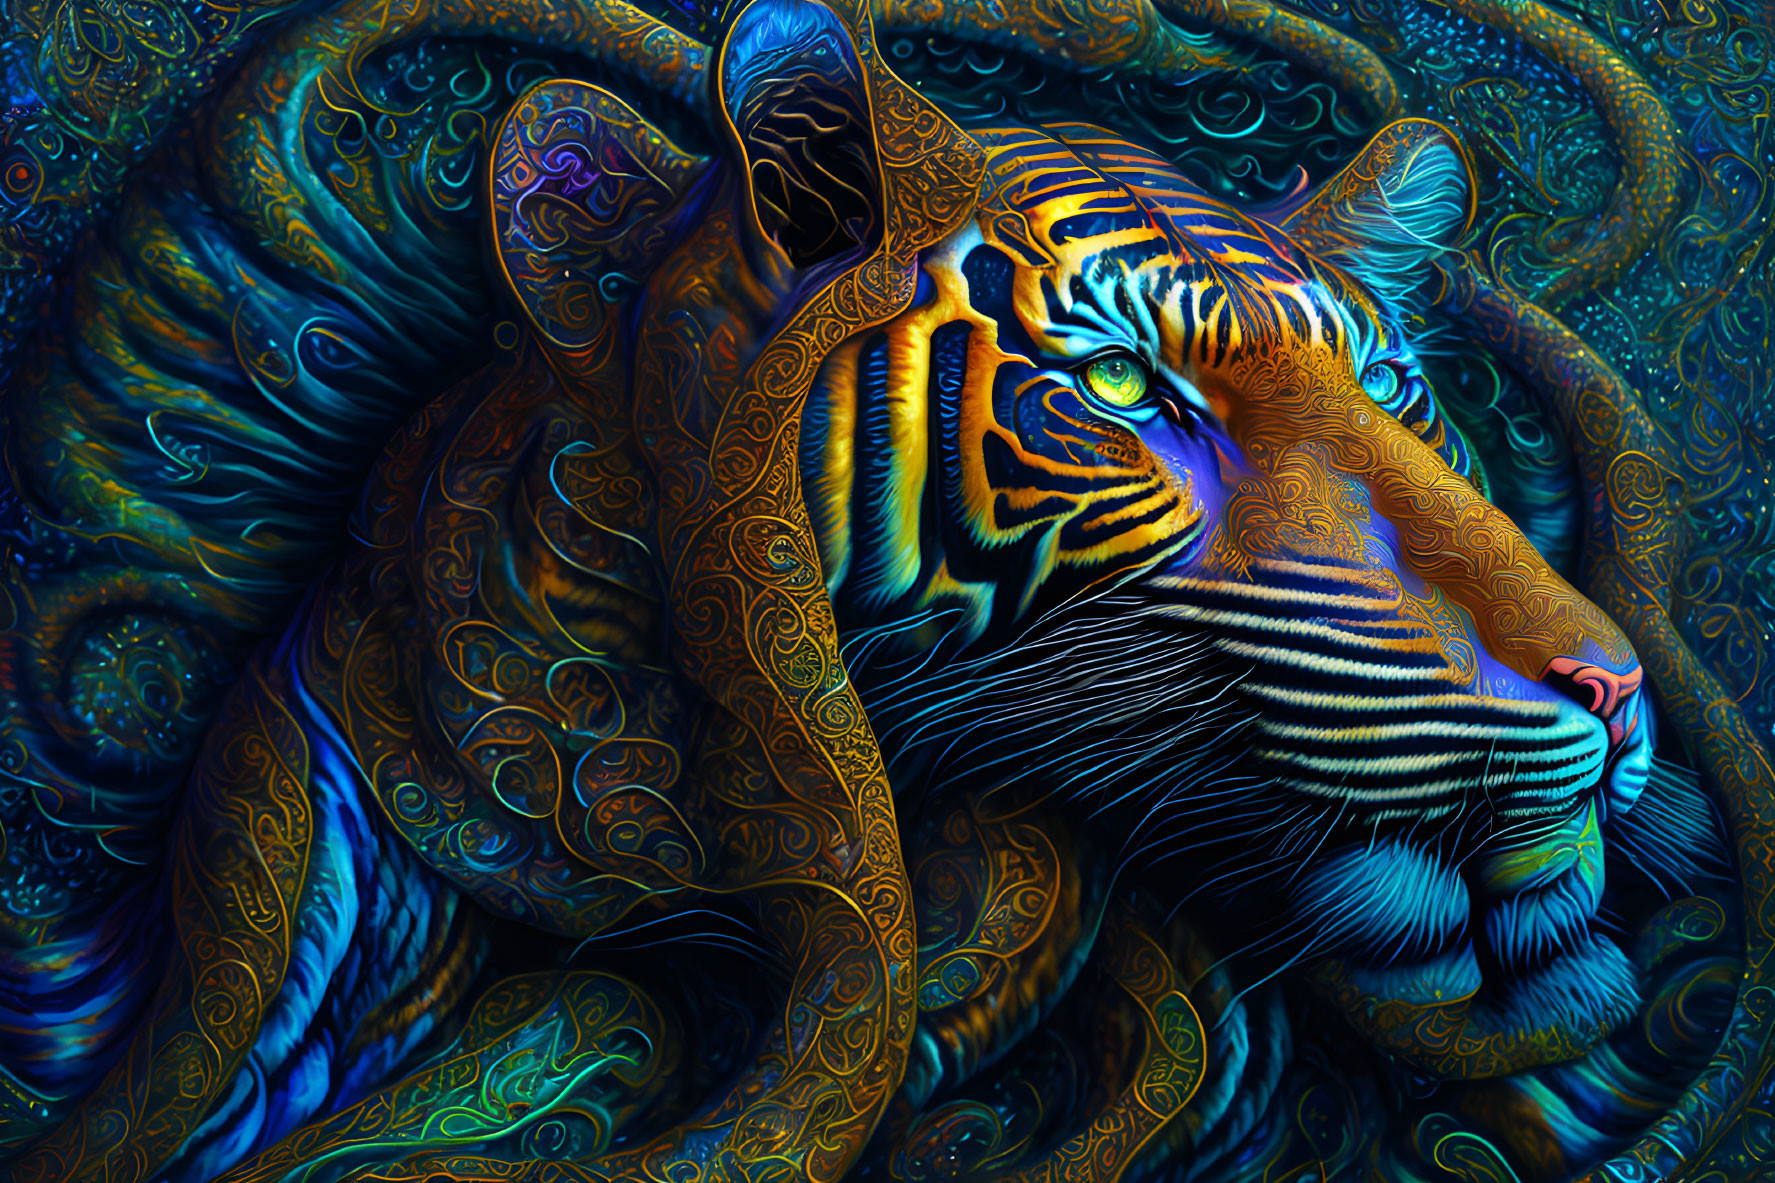 Colorful Tiger Digital Art with Intricate Patterns